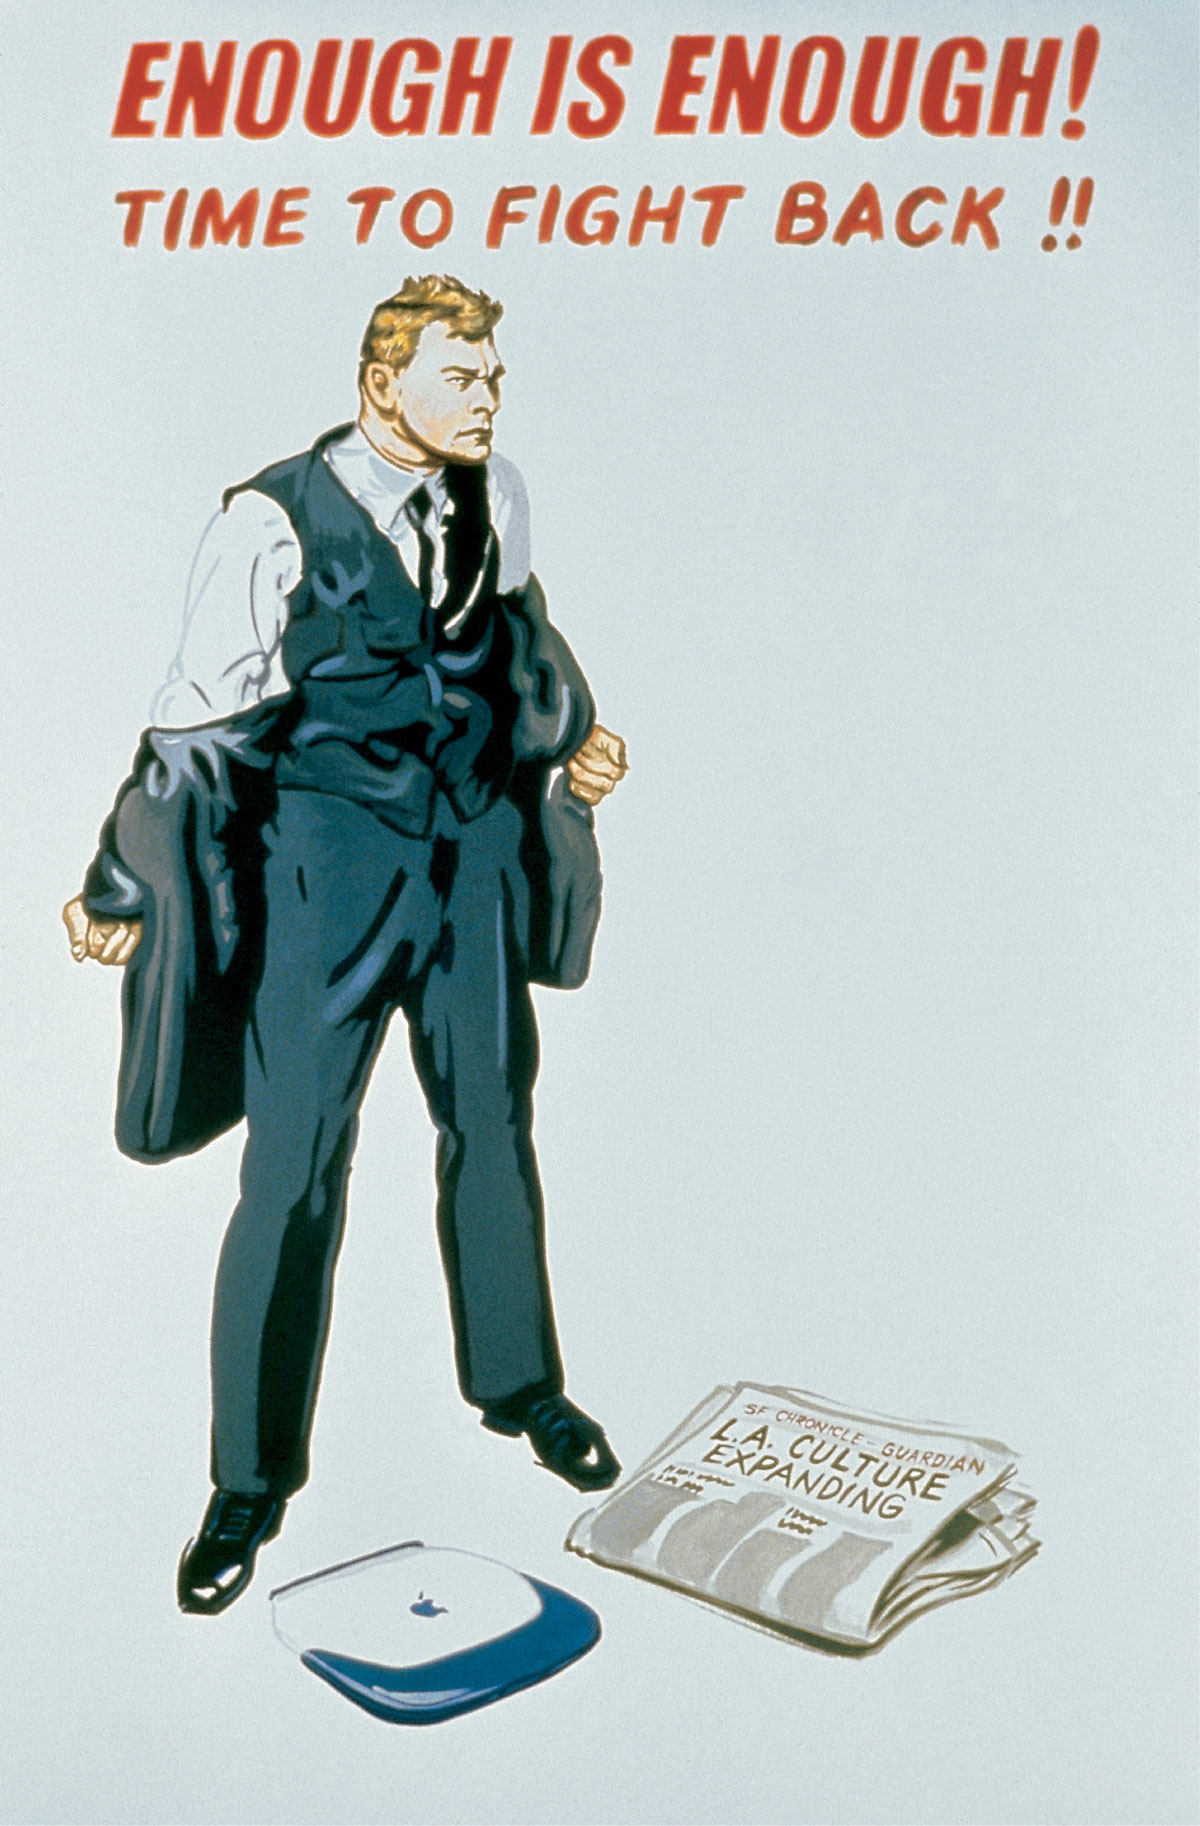 Poster depicting a man removing his suit jacket in anger at the newspaper headline “L.A Culture Expanding.”